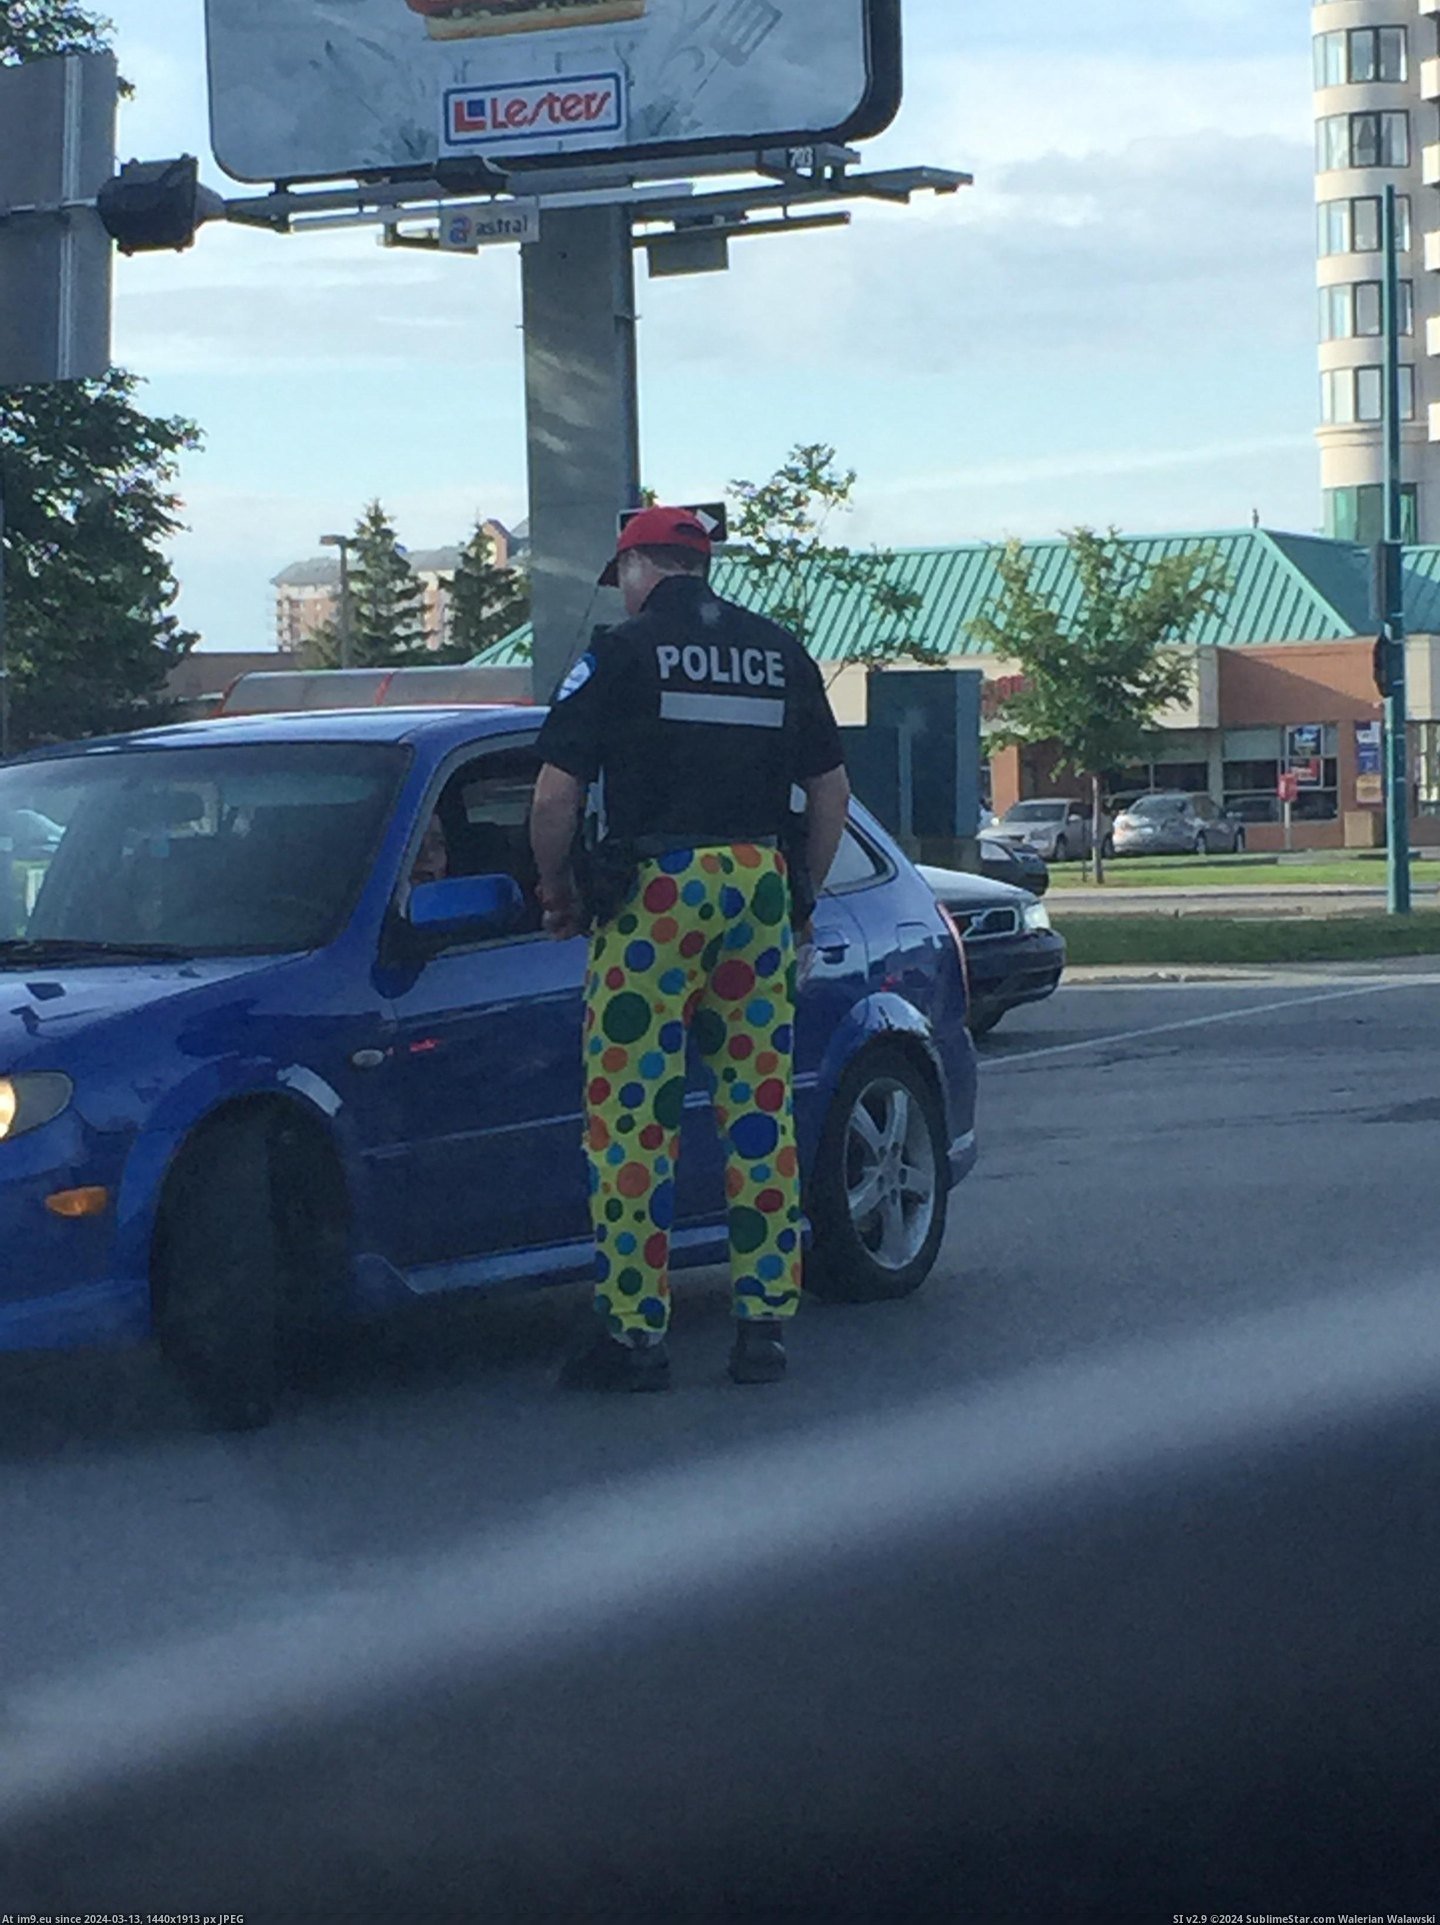 #Wearing #Bit #Pants #Coloured #Montreal #Police #Ridiculous #Protest [Pics] Police in Montreal protest their contracts by wearing different coloured pants. It's getting a bit ridiculous Pic. (Изображение из альбом My r/PICS favs))